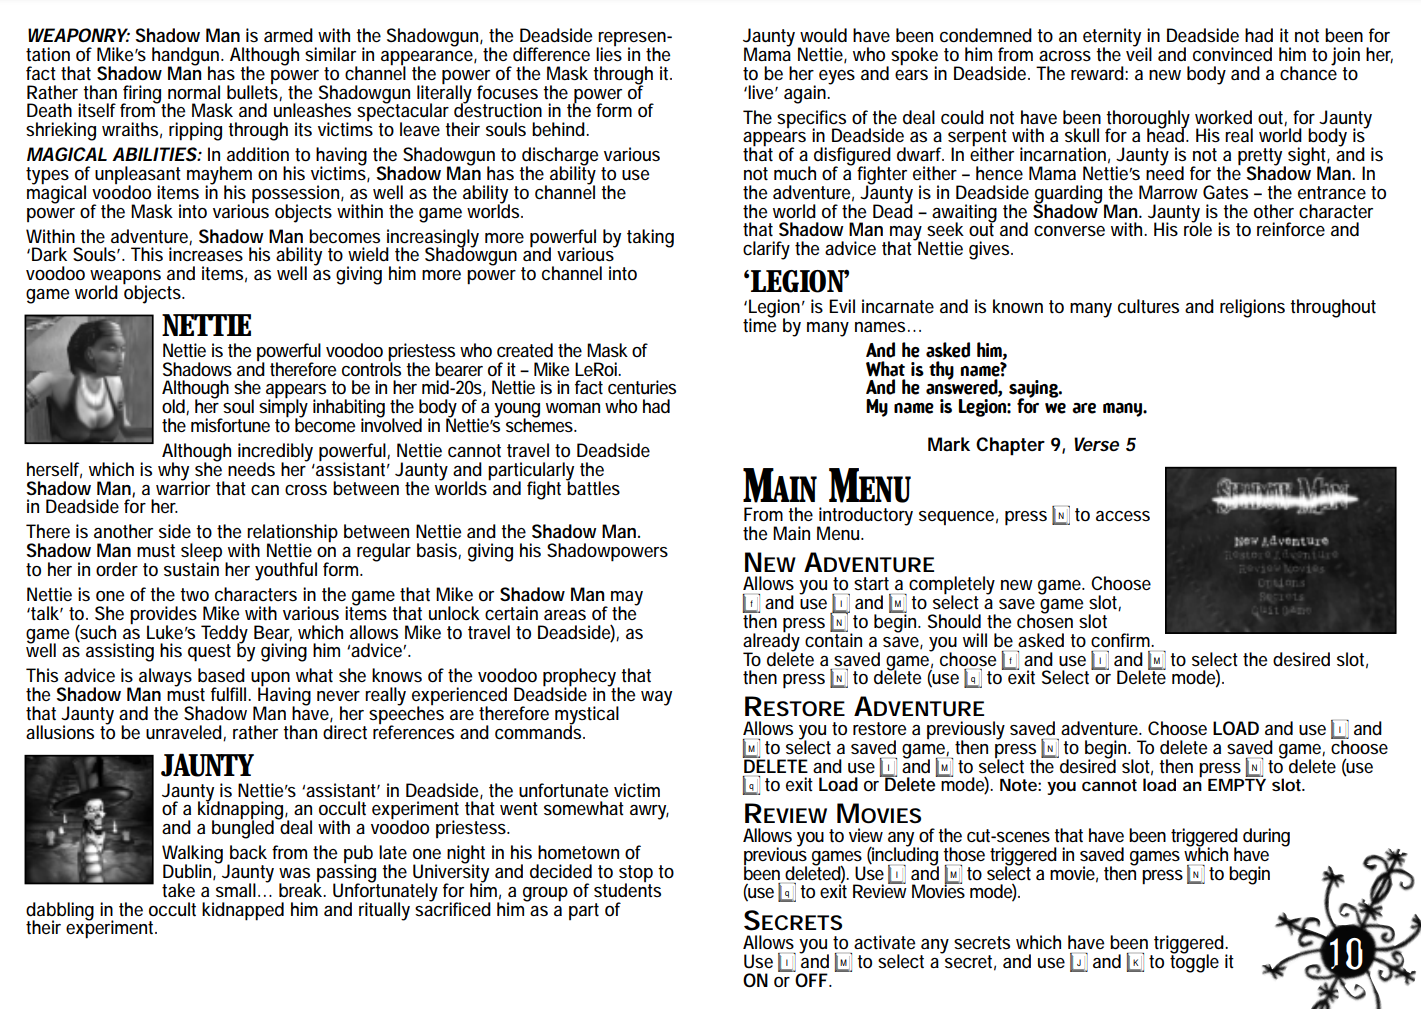 Shadow Man Remastered User's Manual: Classic. - Page Nine-Ten